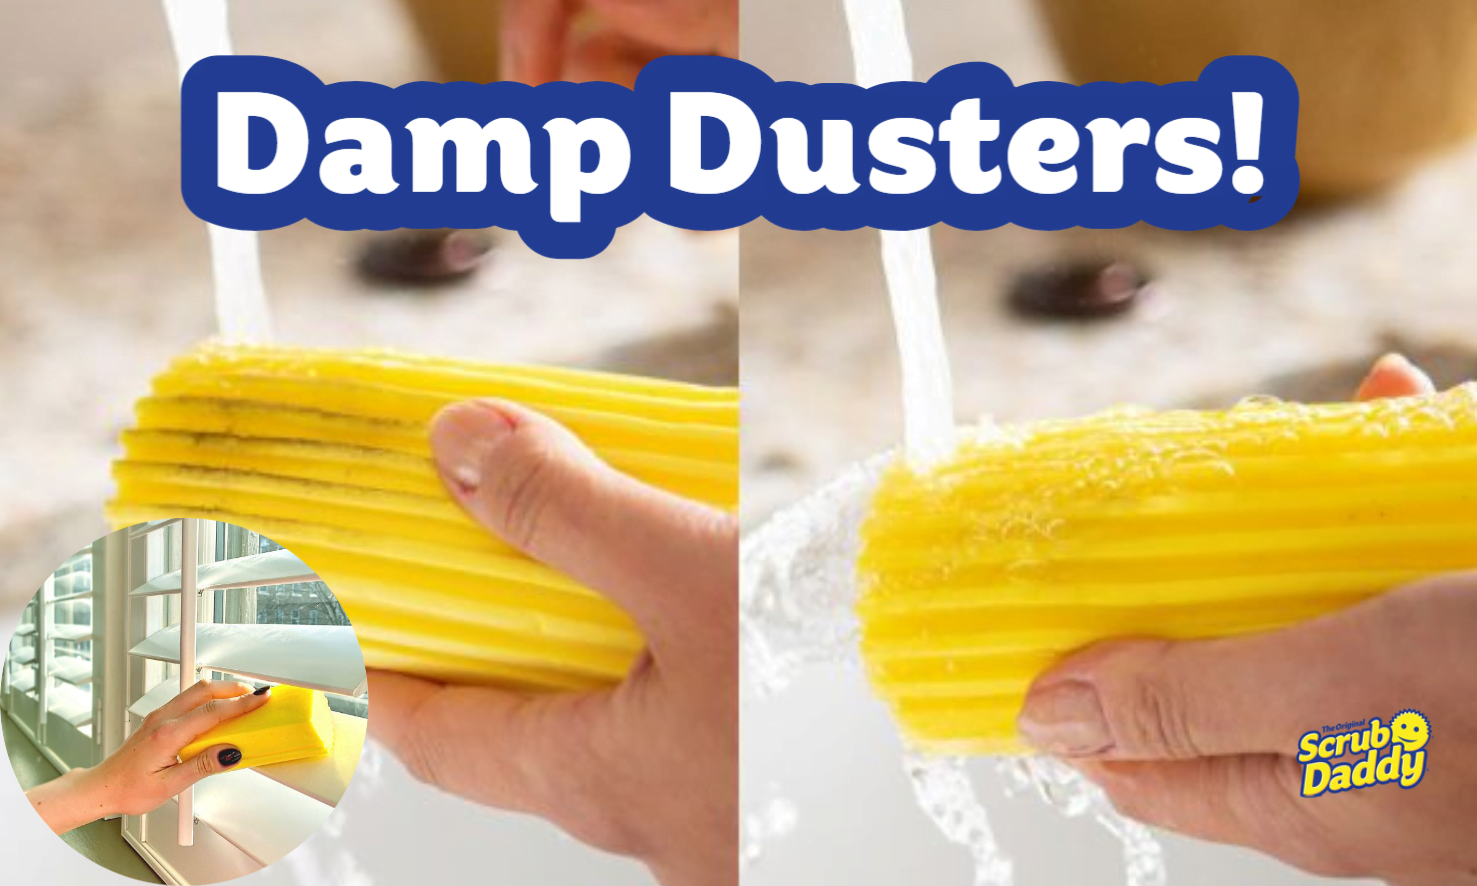 https://scrub-daddy.pl/wp-content/uploads/2022/02/Damp-Dusters.png